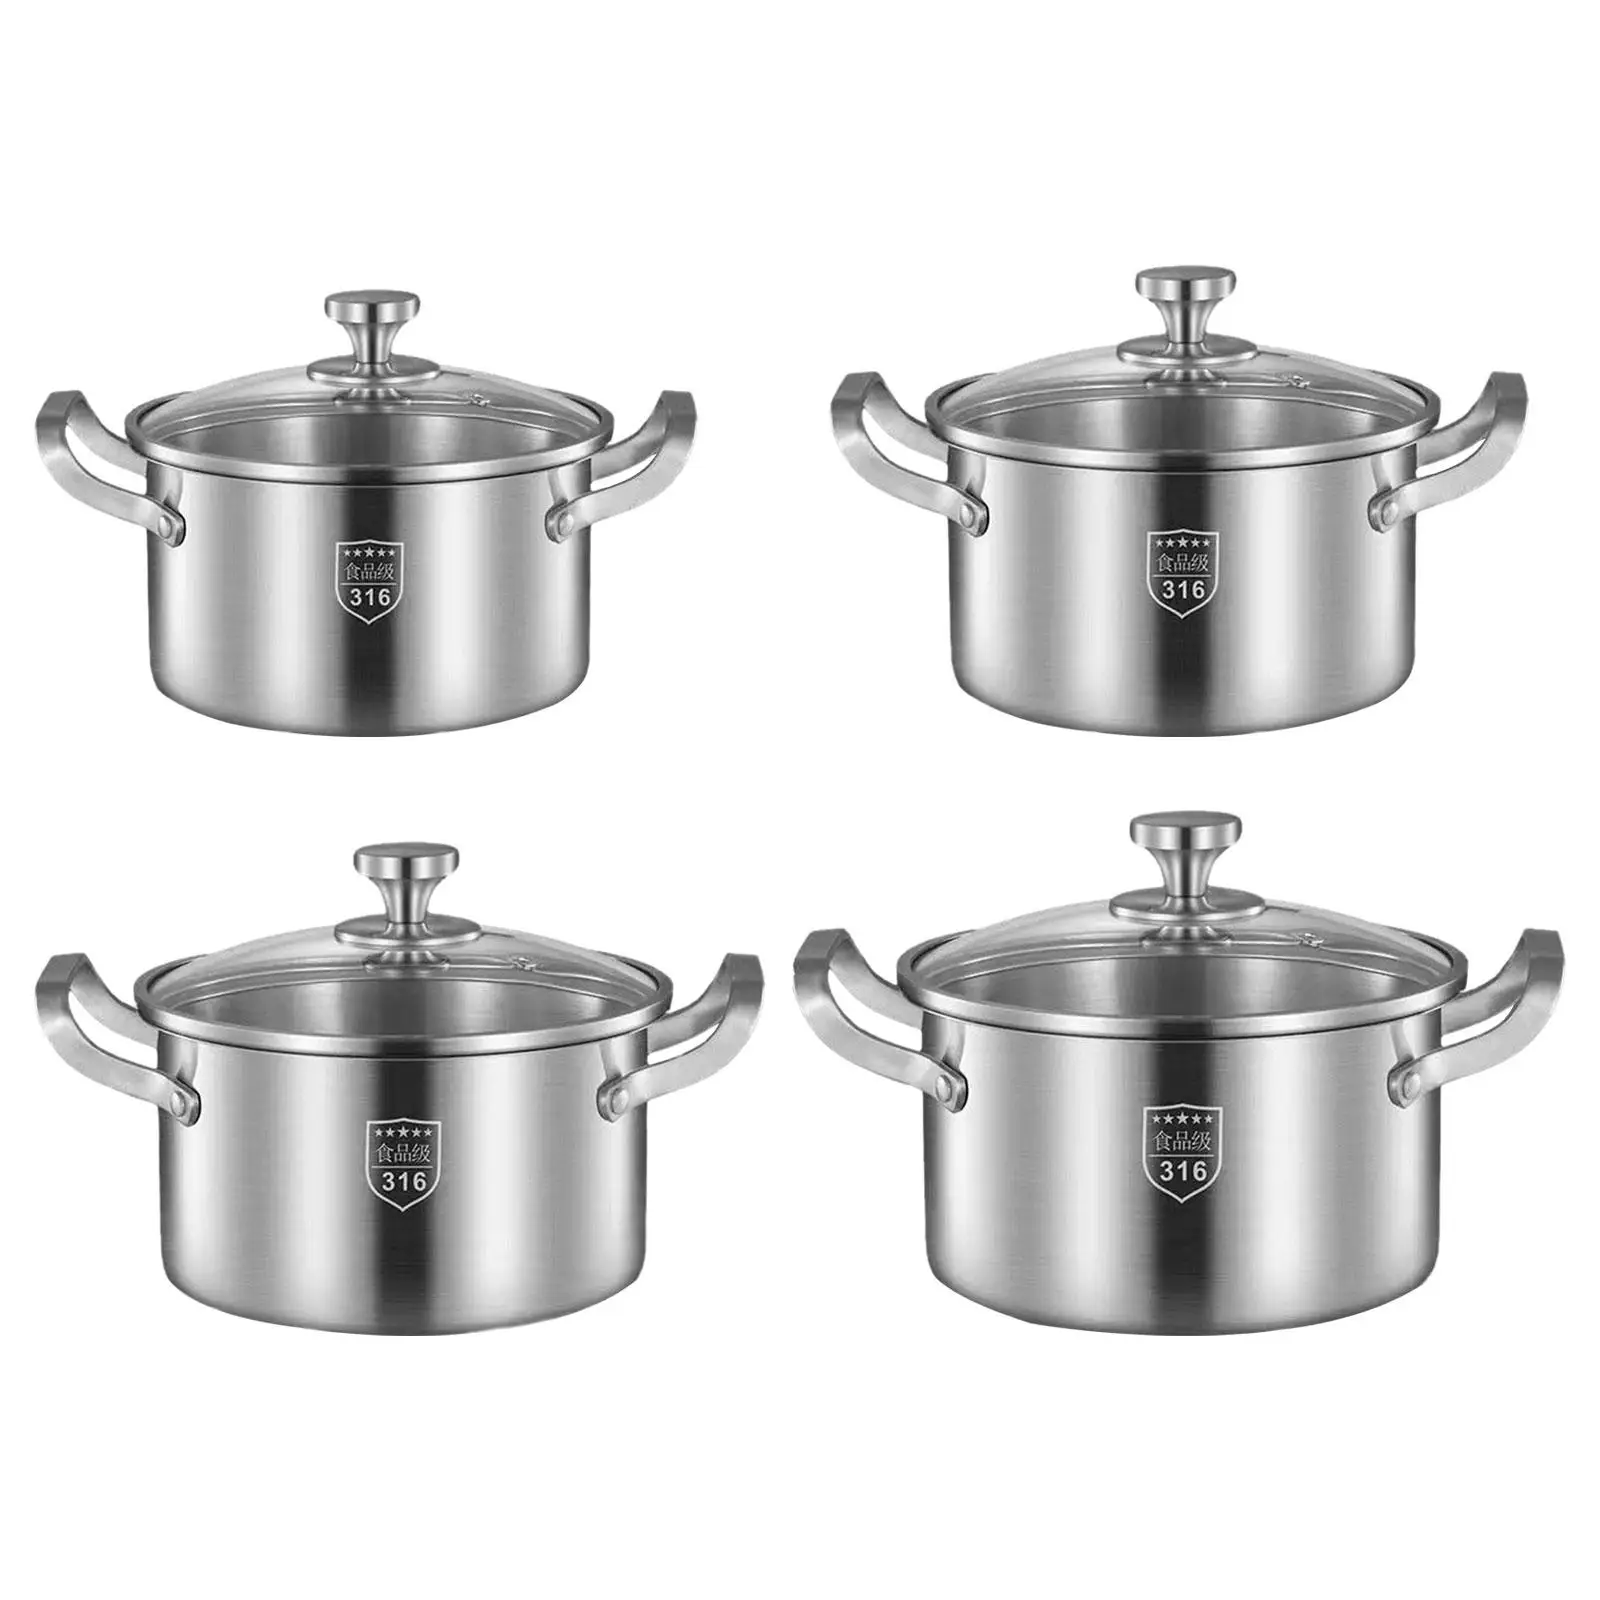 Soup Pot Multipurpose Nonstick Pan Works Kitchen Utensils Portable Stainless Steel Stockpot with Lid for Bar Kitchen Countertop